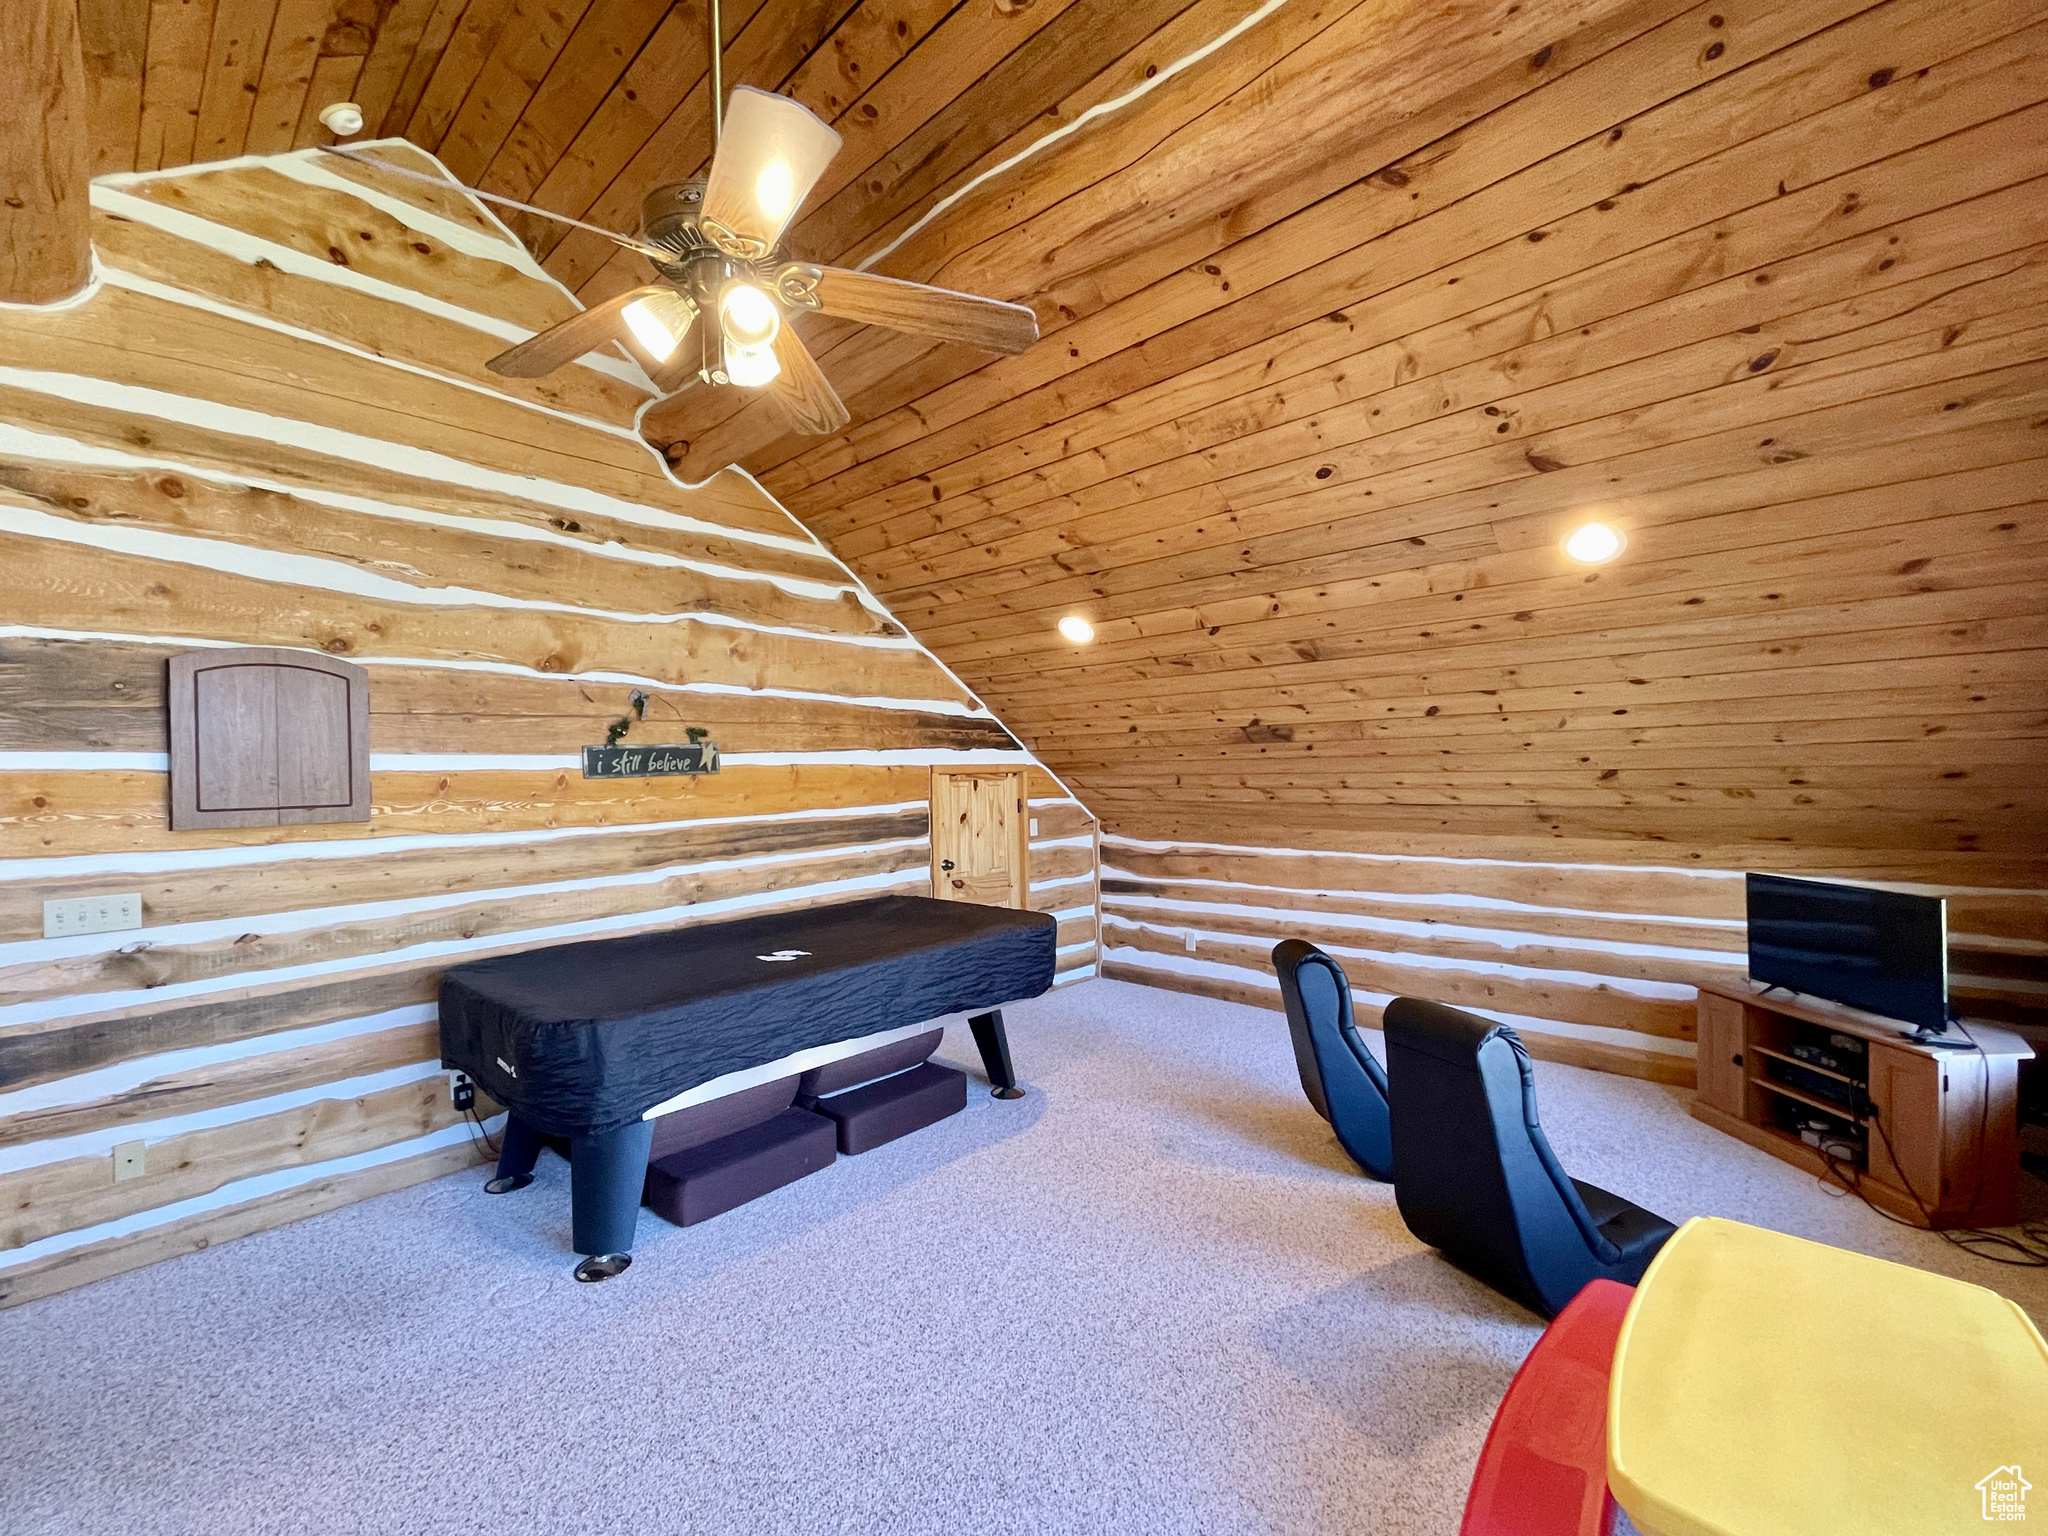 Interior space with log walls, pool table, lofted ceiling, carpet flooring, and wooden ceiling